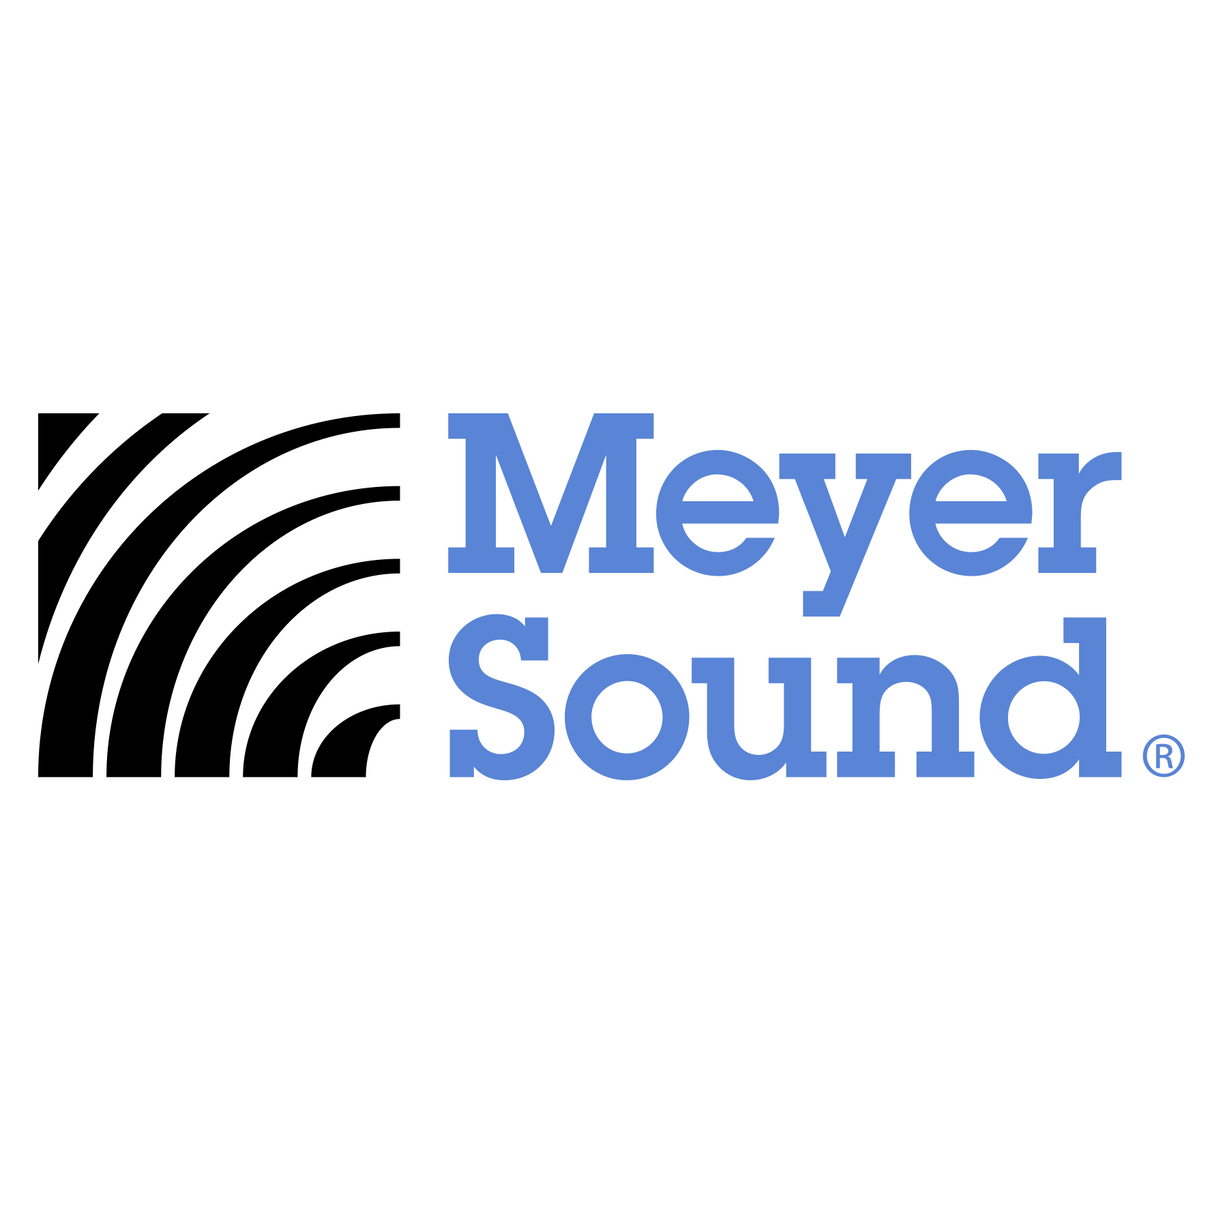 Meyer Sound HBC-01 handle bar & cup; for MSL-3/3A/4, USW-1, 650-R2/P, 750-P, PSW-2/4